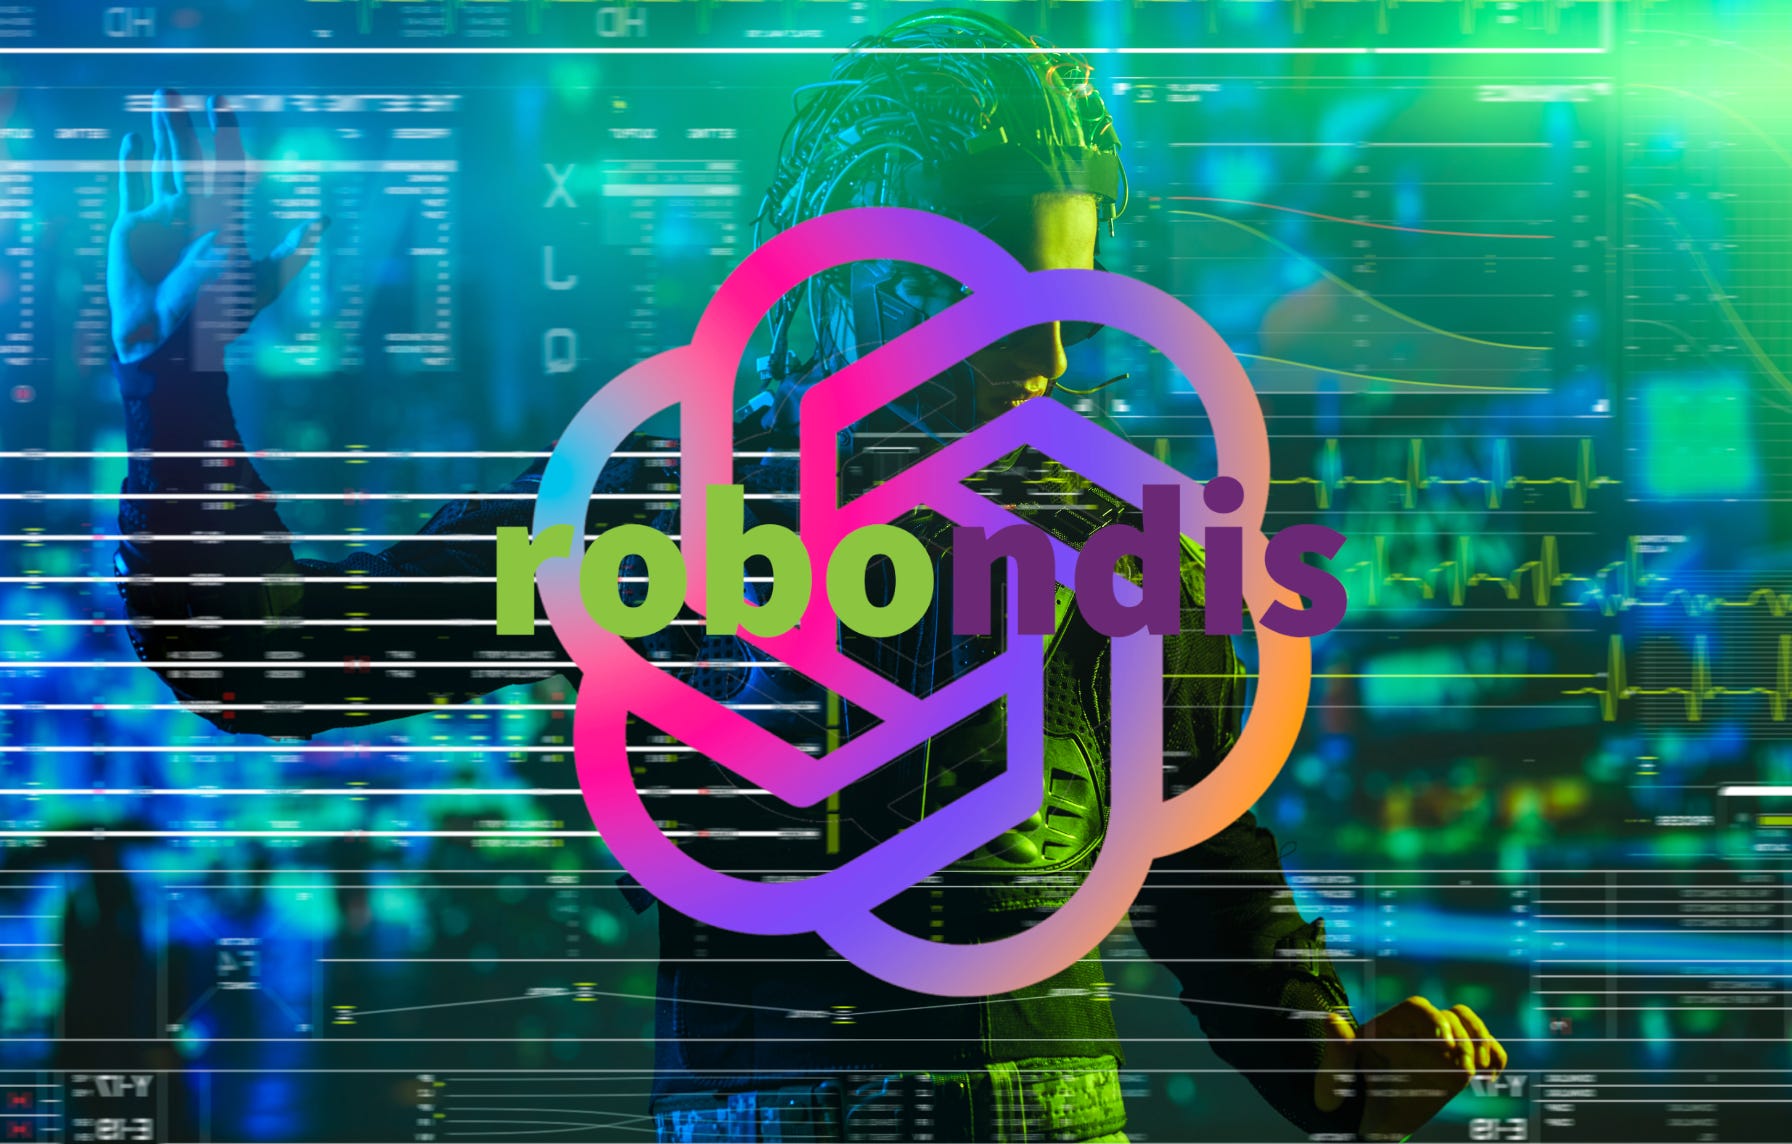 Green high tech background. Futuristic woman. Pink and purple GPT logo. Purpled green text on top of logo reads ‘robondis”.